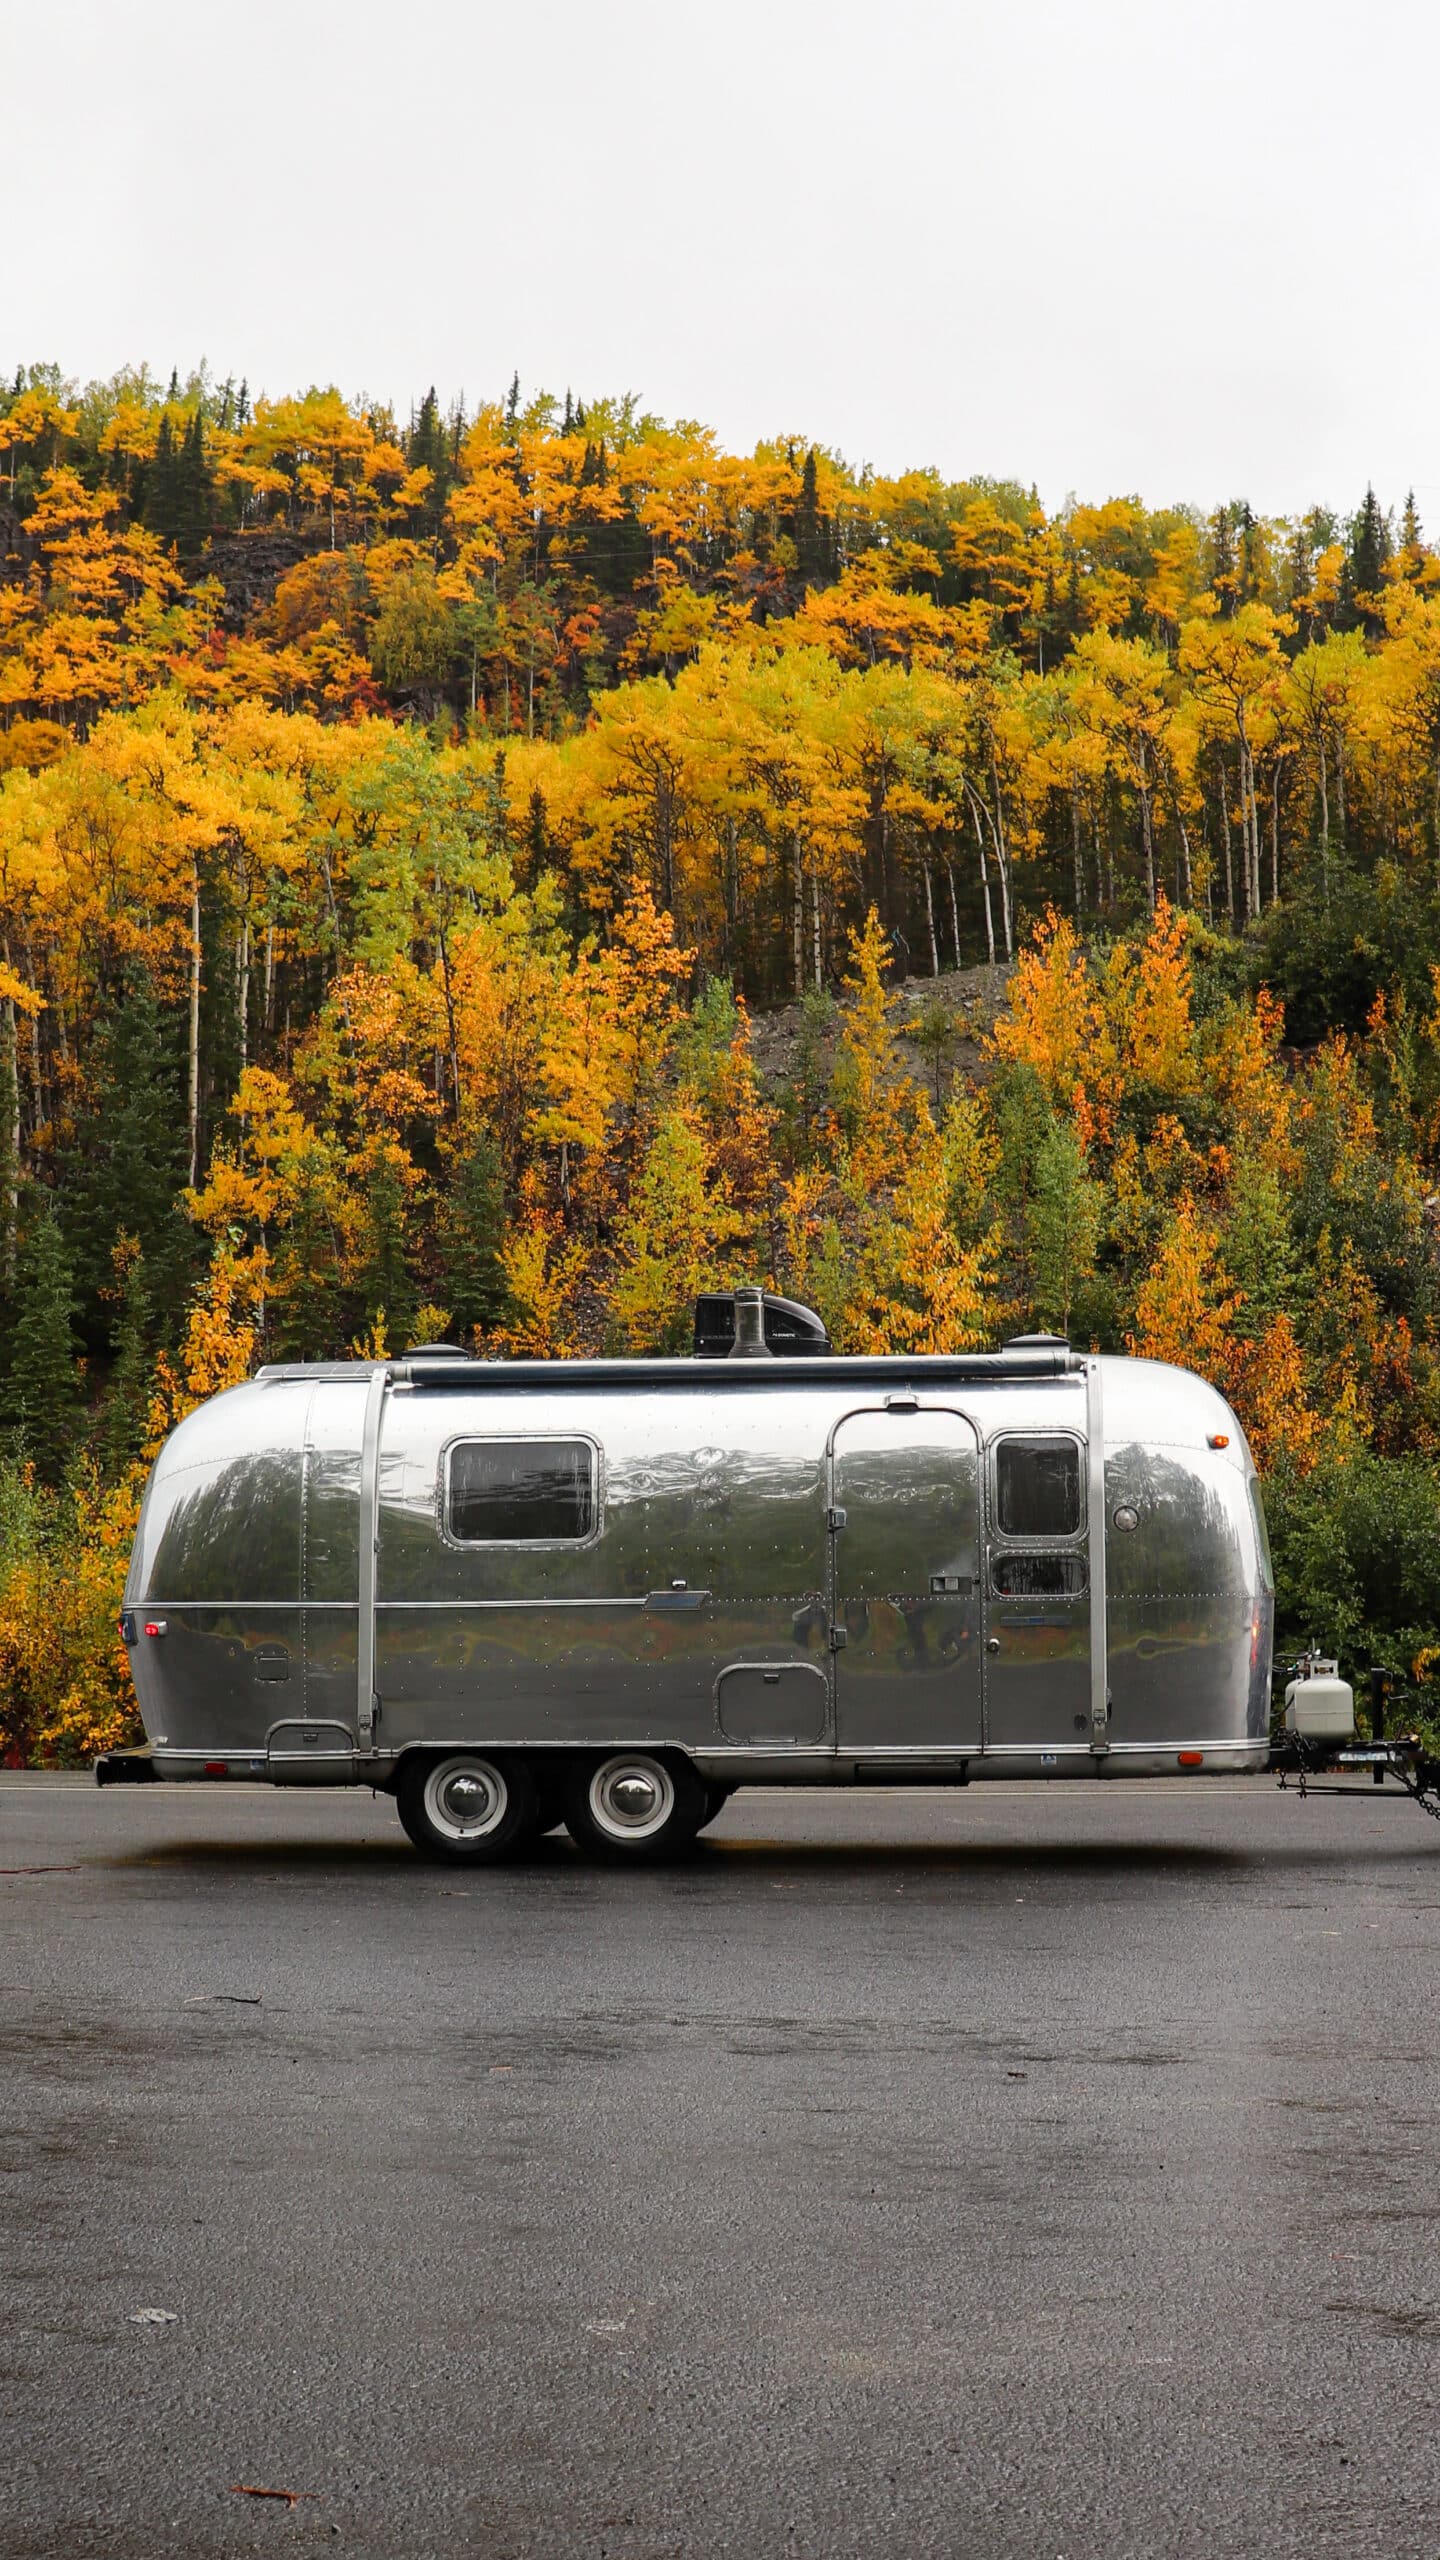 Slow Car Fast Home's Airstream in Alaska